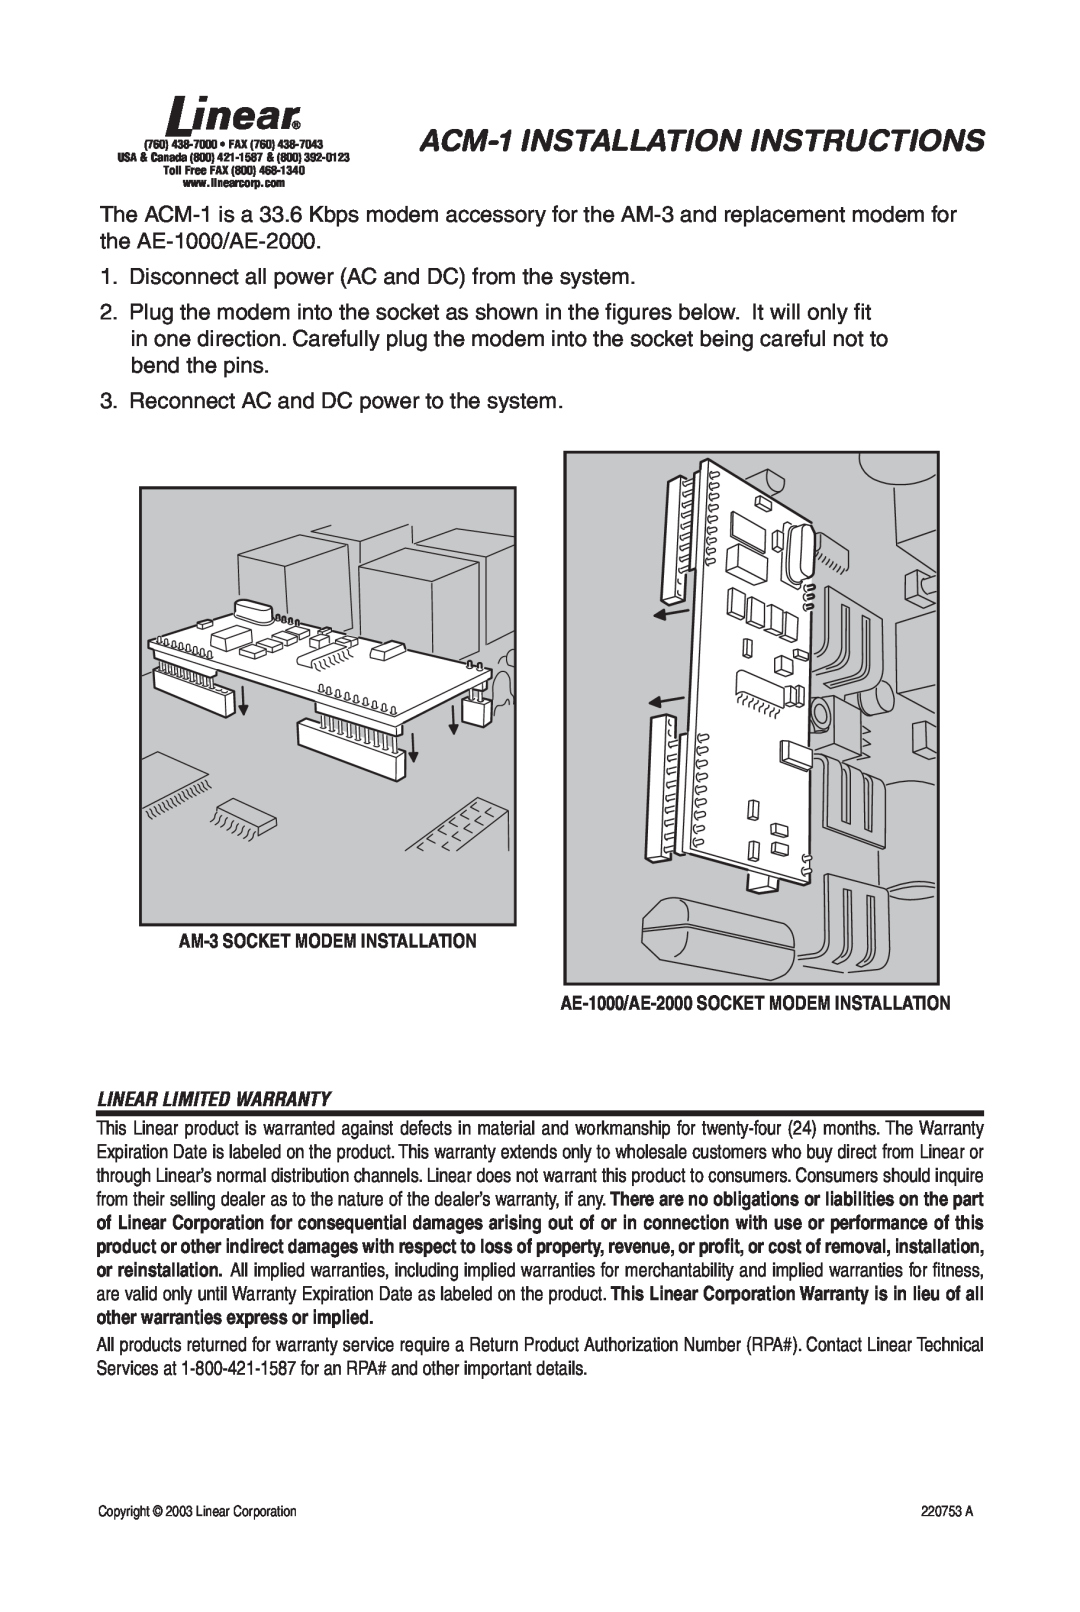 Linear installation instructions ACM-1 INSTALLATION INSTRUCTIONS, Disconnect all power AC and DC from the system 